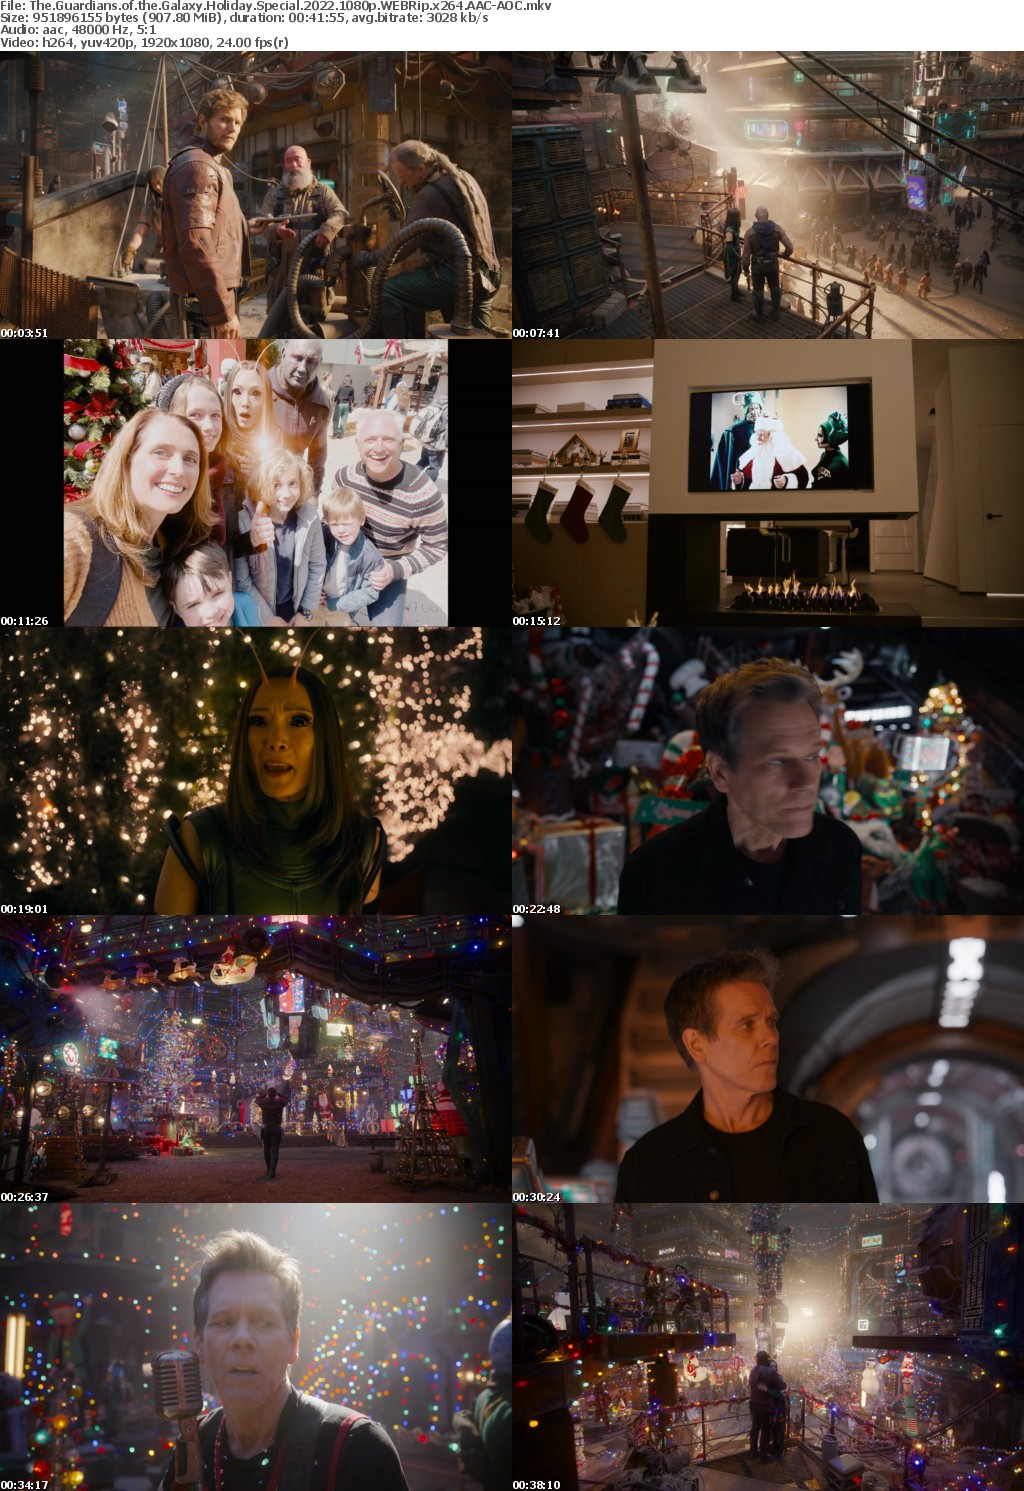 The Guardians of the Galaxy Holiday Special 2022 1080p WEBRip x264 AAC-AOC